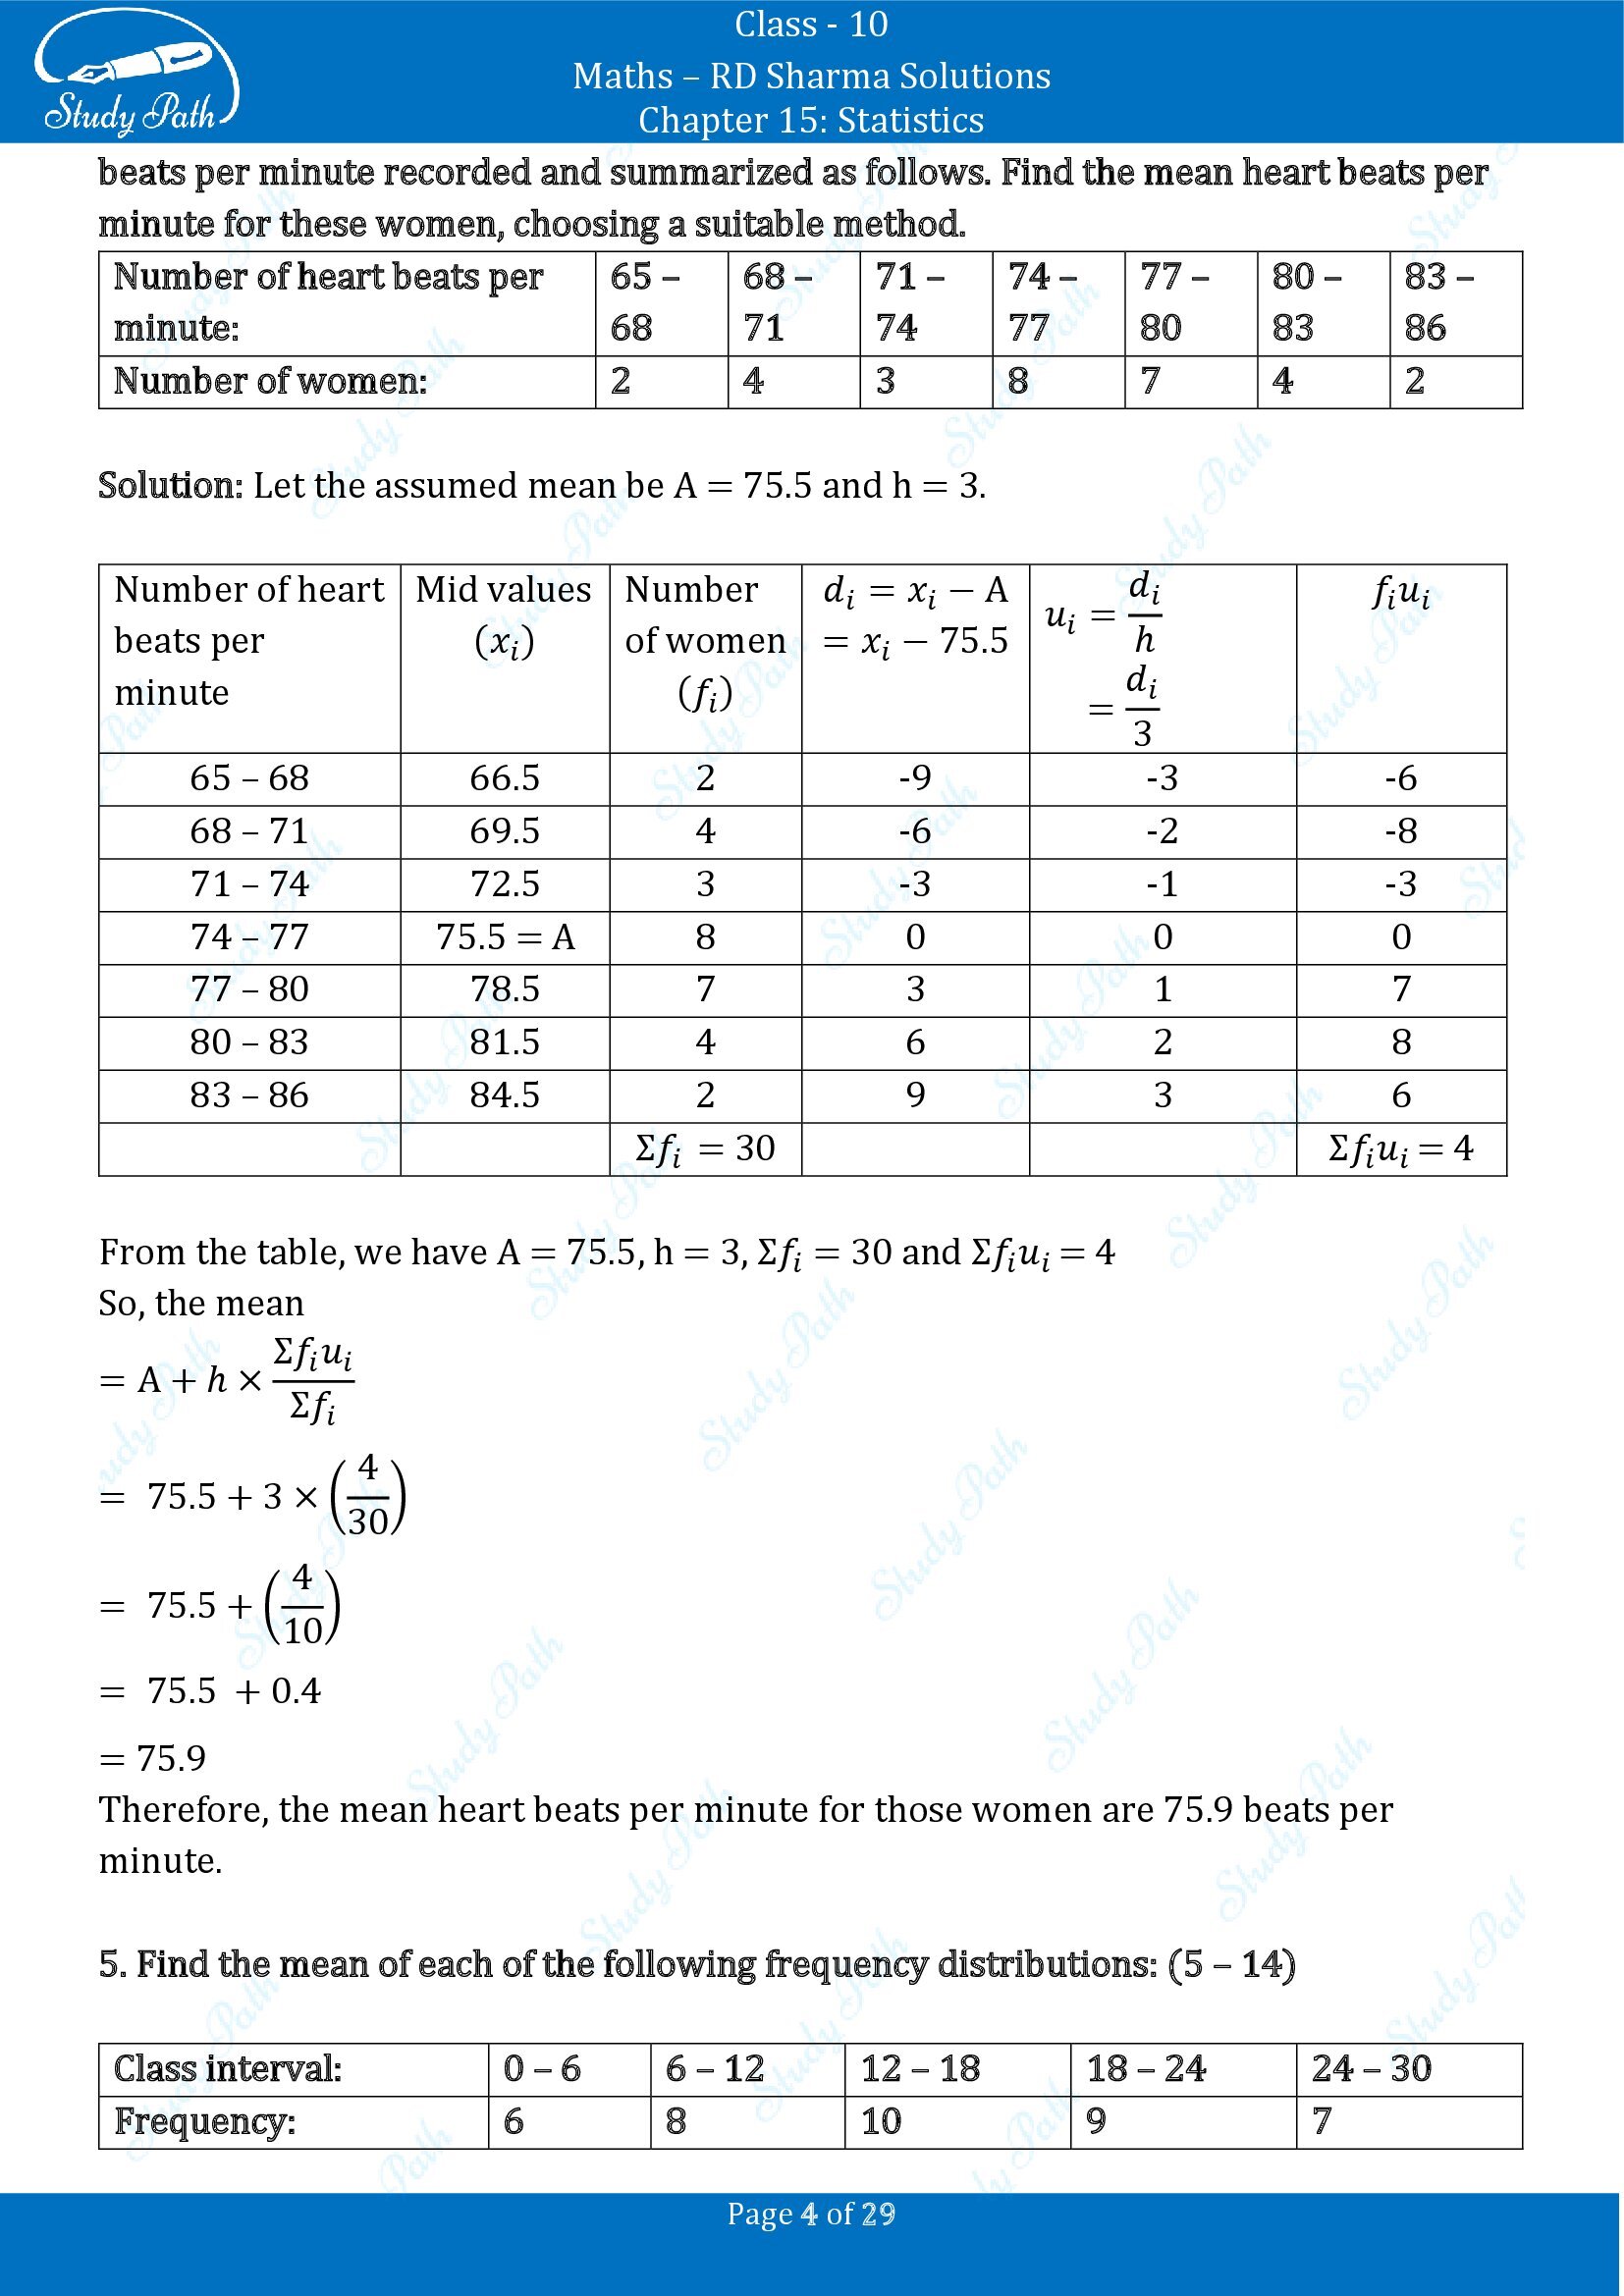 RD Sharma Solutions Class 10 Chapter 15 Statistics Exercise 15.3 0004